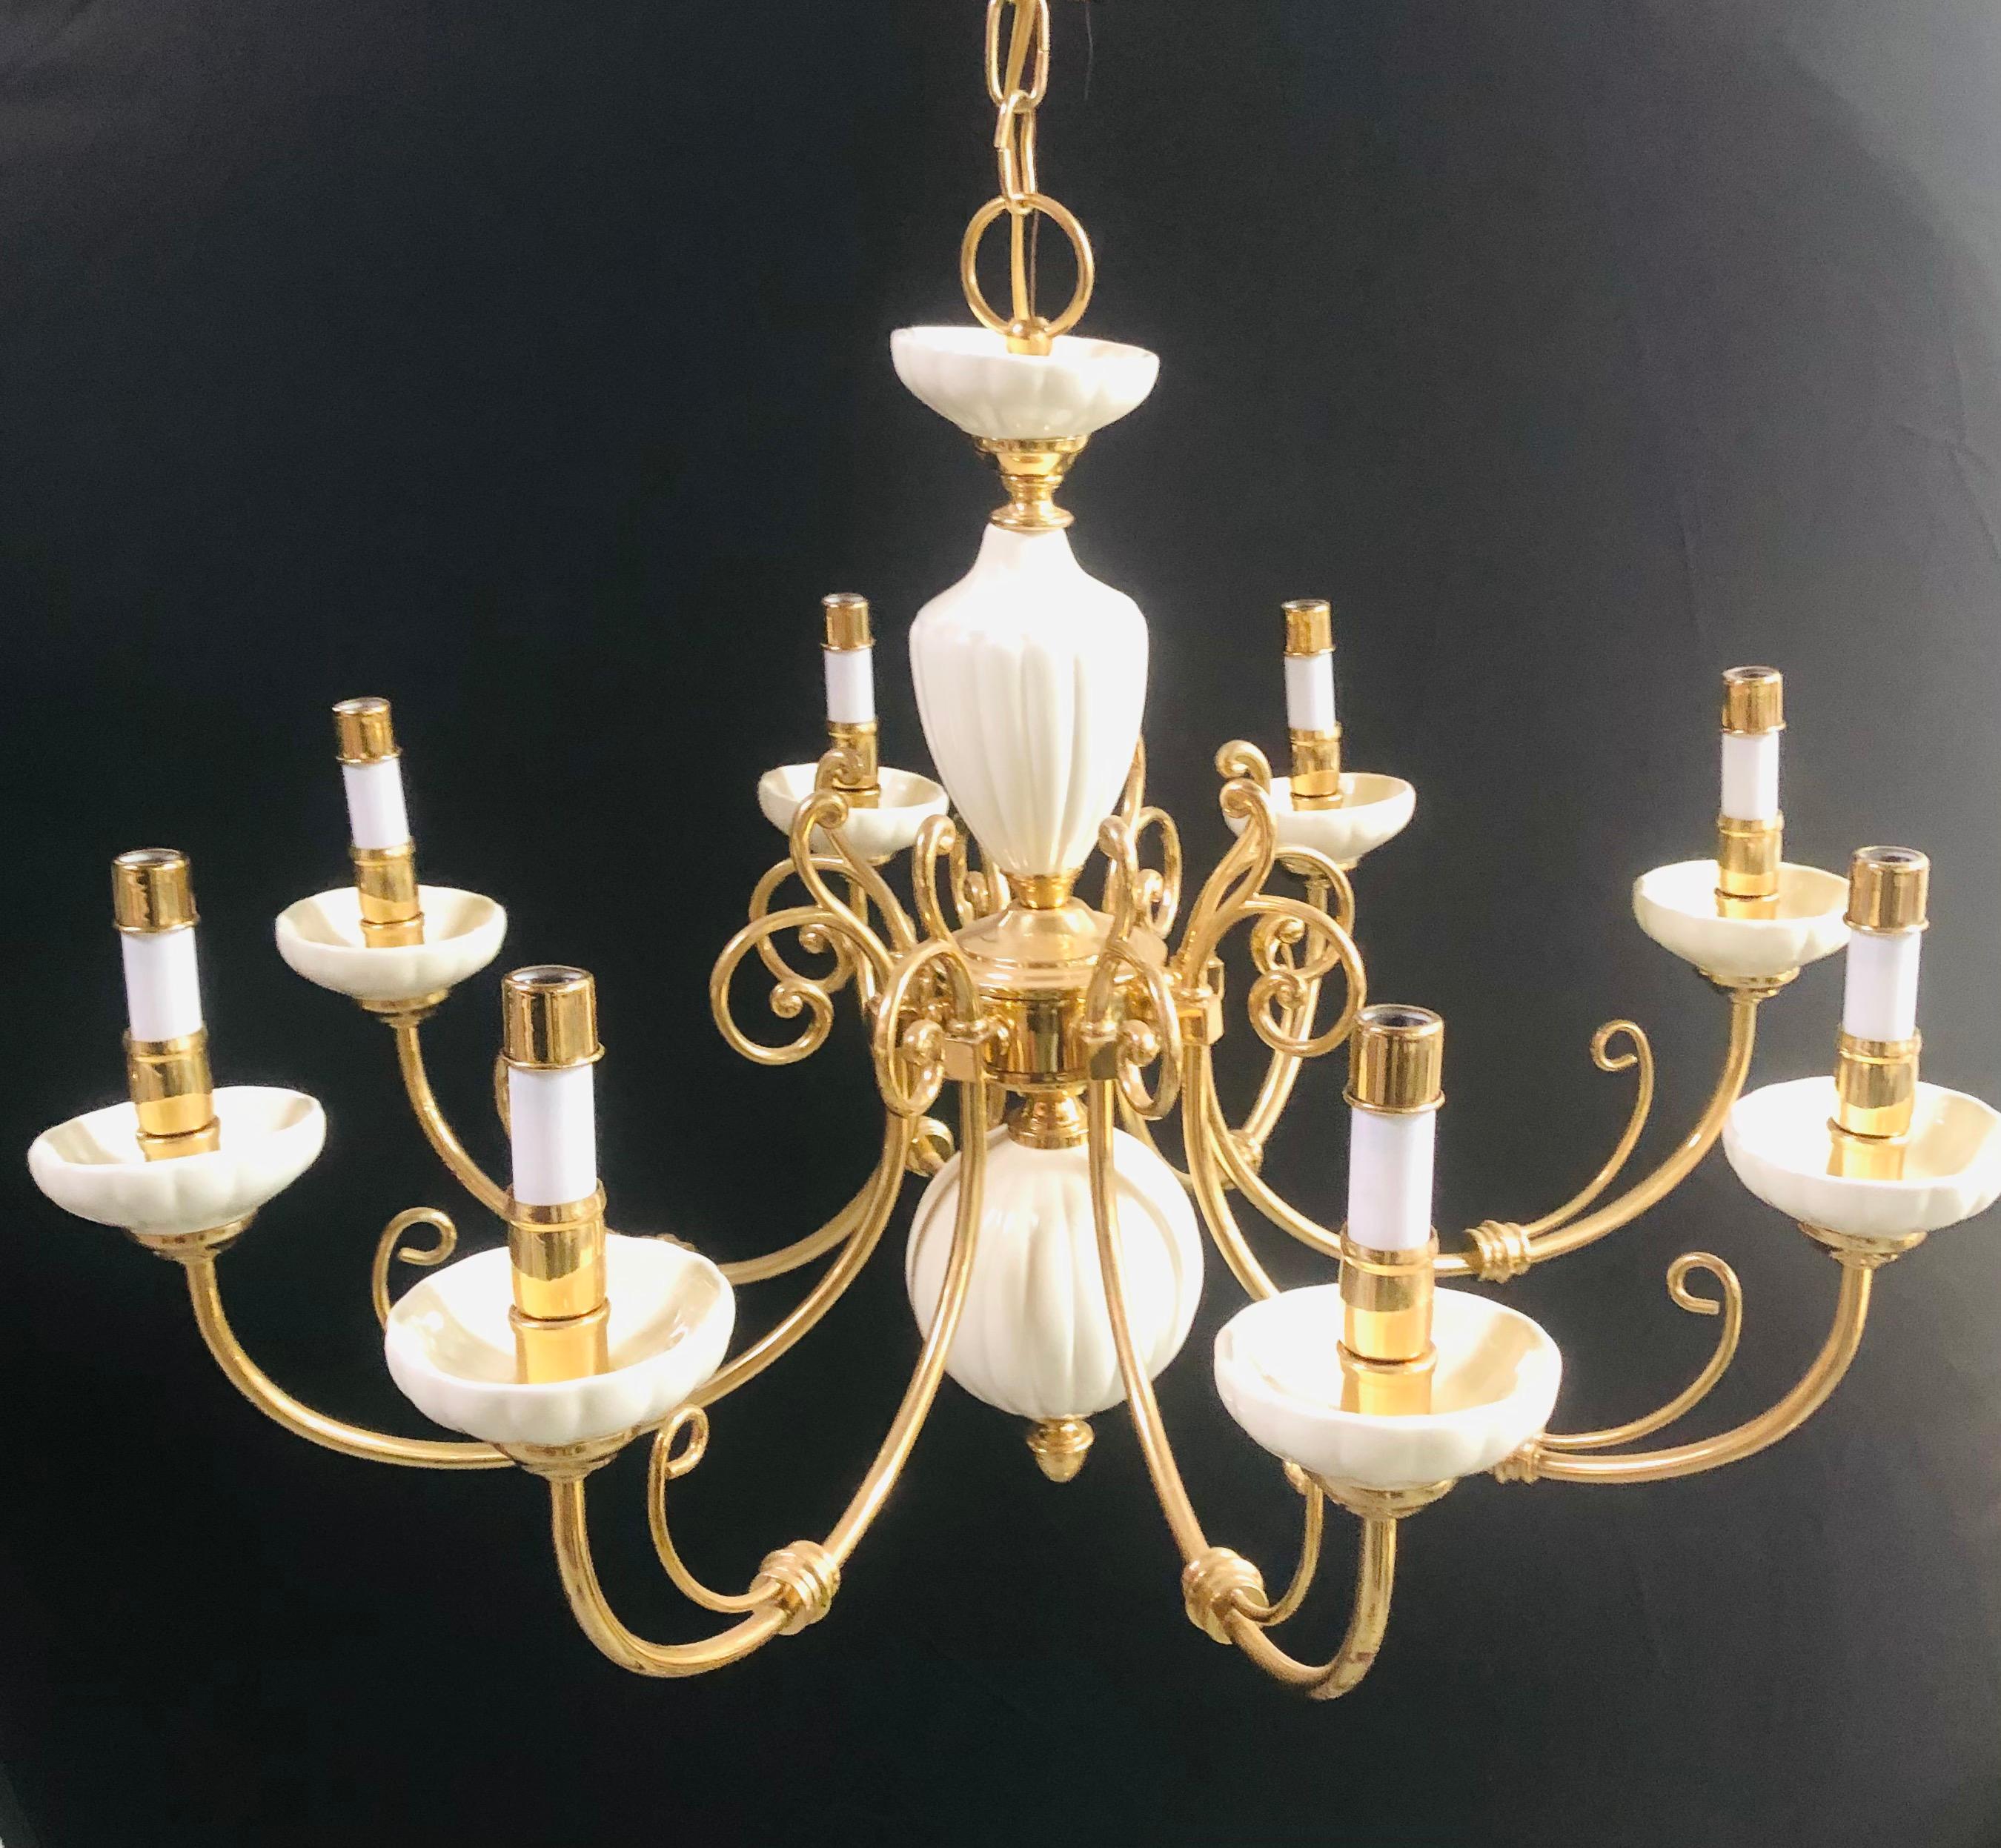 An elegant Georgian style brass and white ceramic eight-arms chandelier. The chandelier features white ceramic bobeches and white urn shaped column with round ball shaped bottom. Elegant fine scrolls defining the style of this chandelier that holds